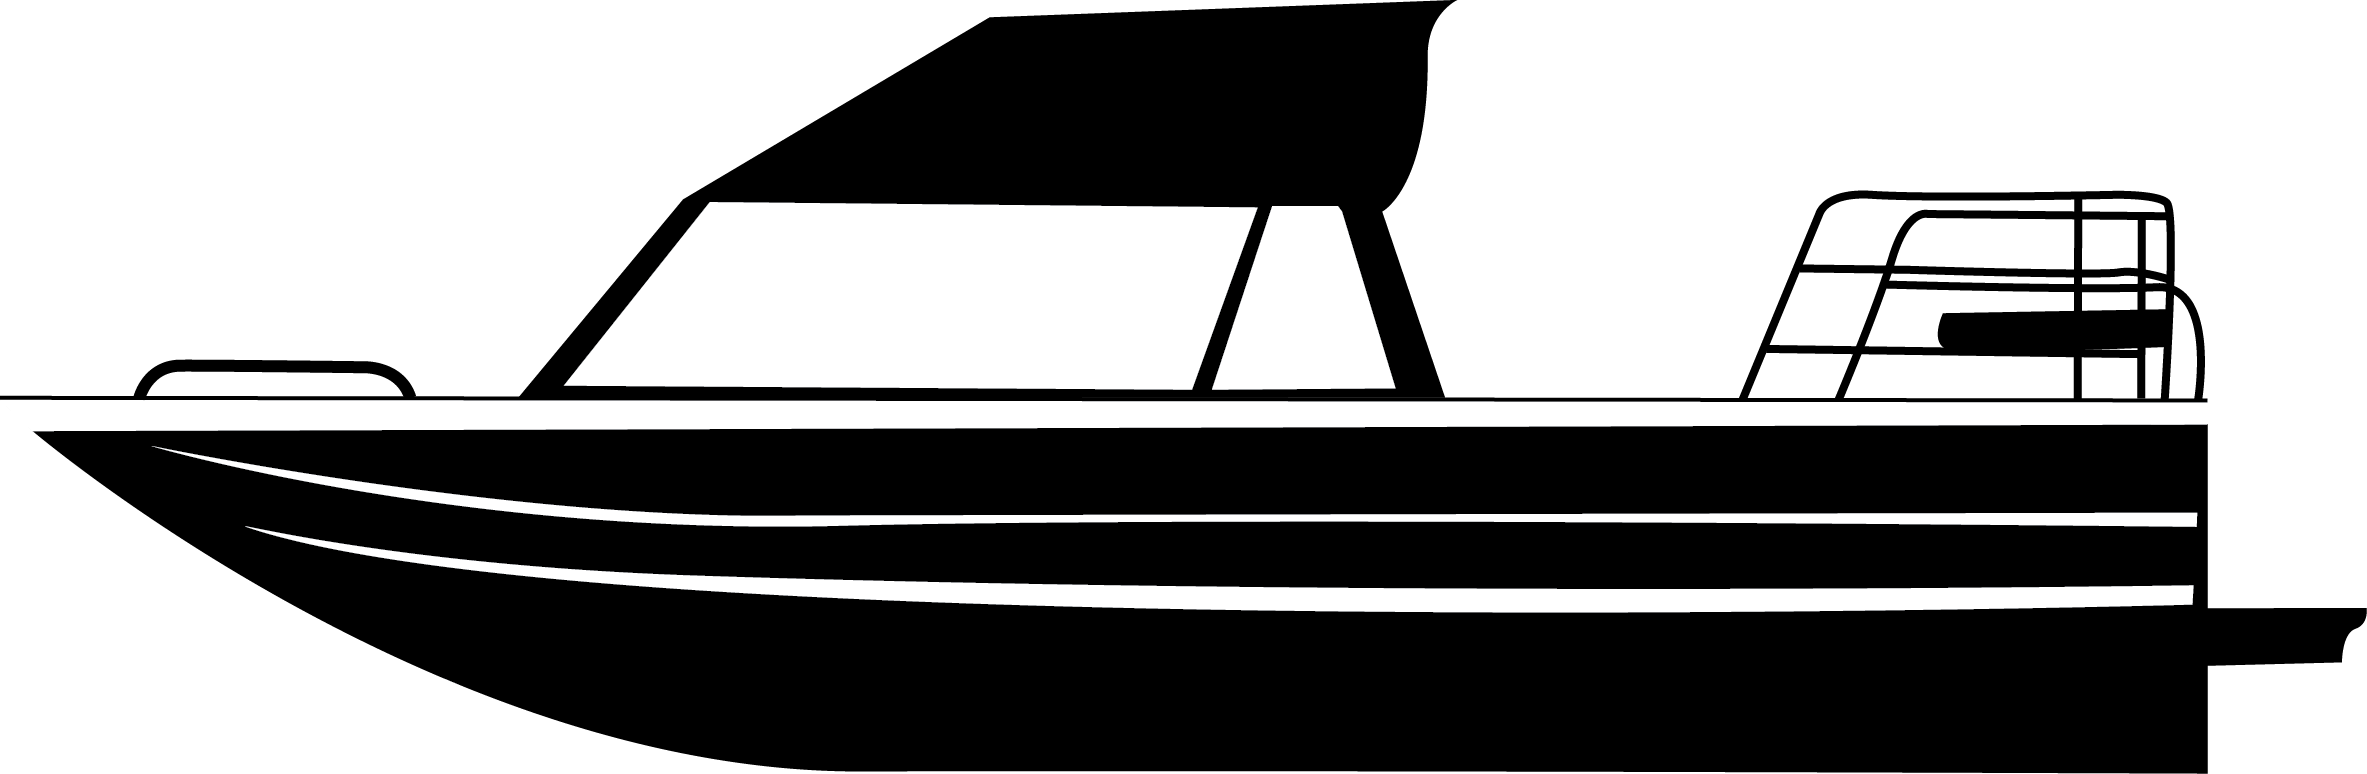 Boat Transparent Clipart, Speed, Fishing, Yacht Boat PNG Images